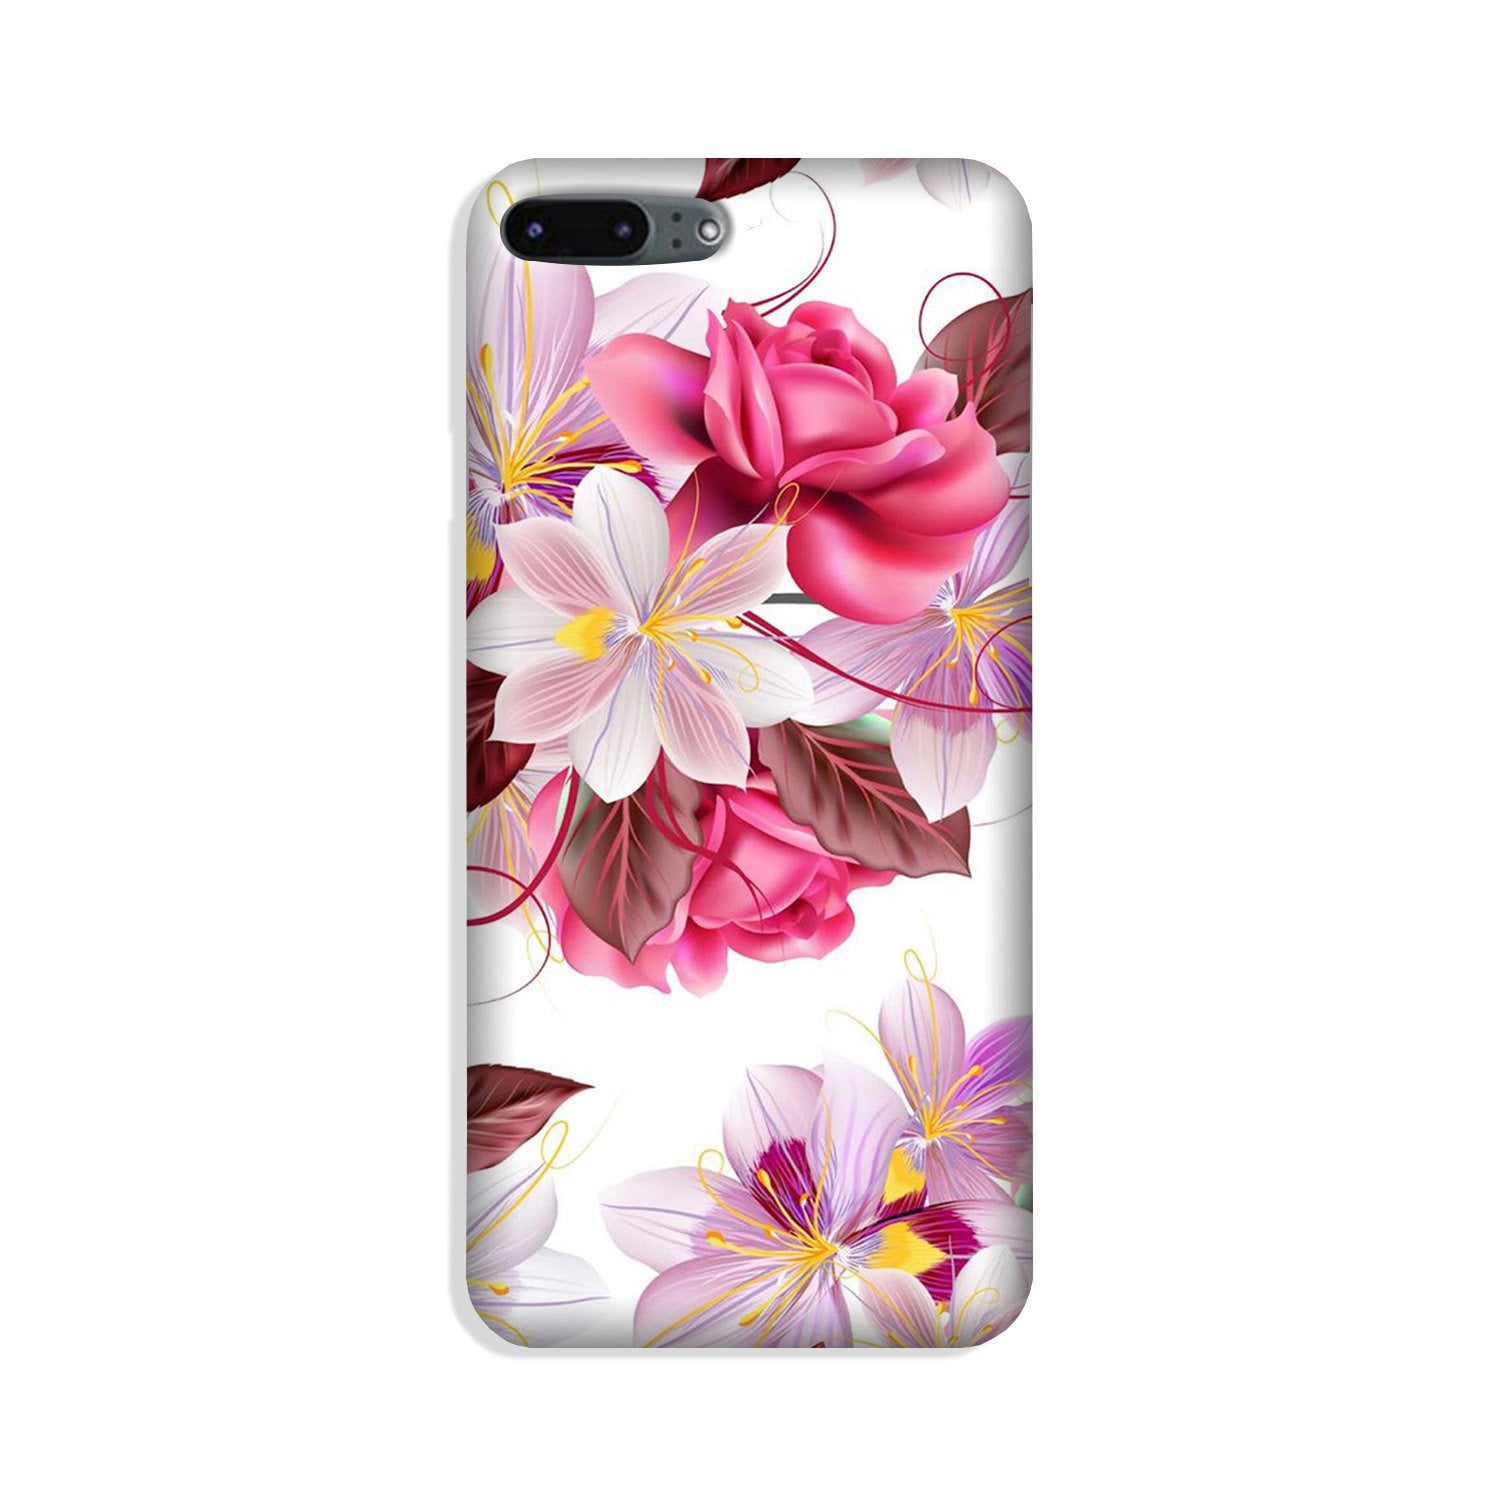 Beautiful flowers Case for iPhone 8 Plus